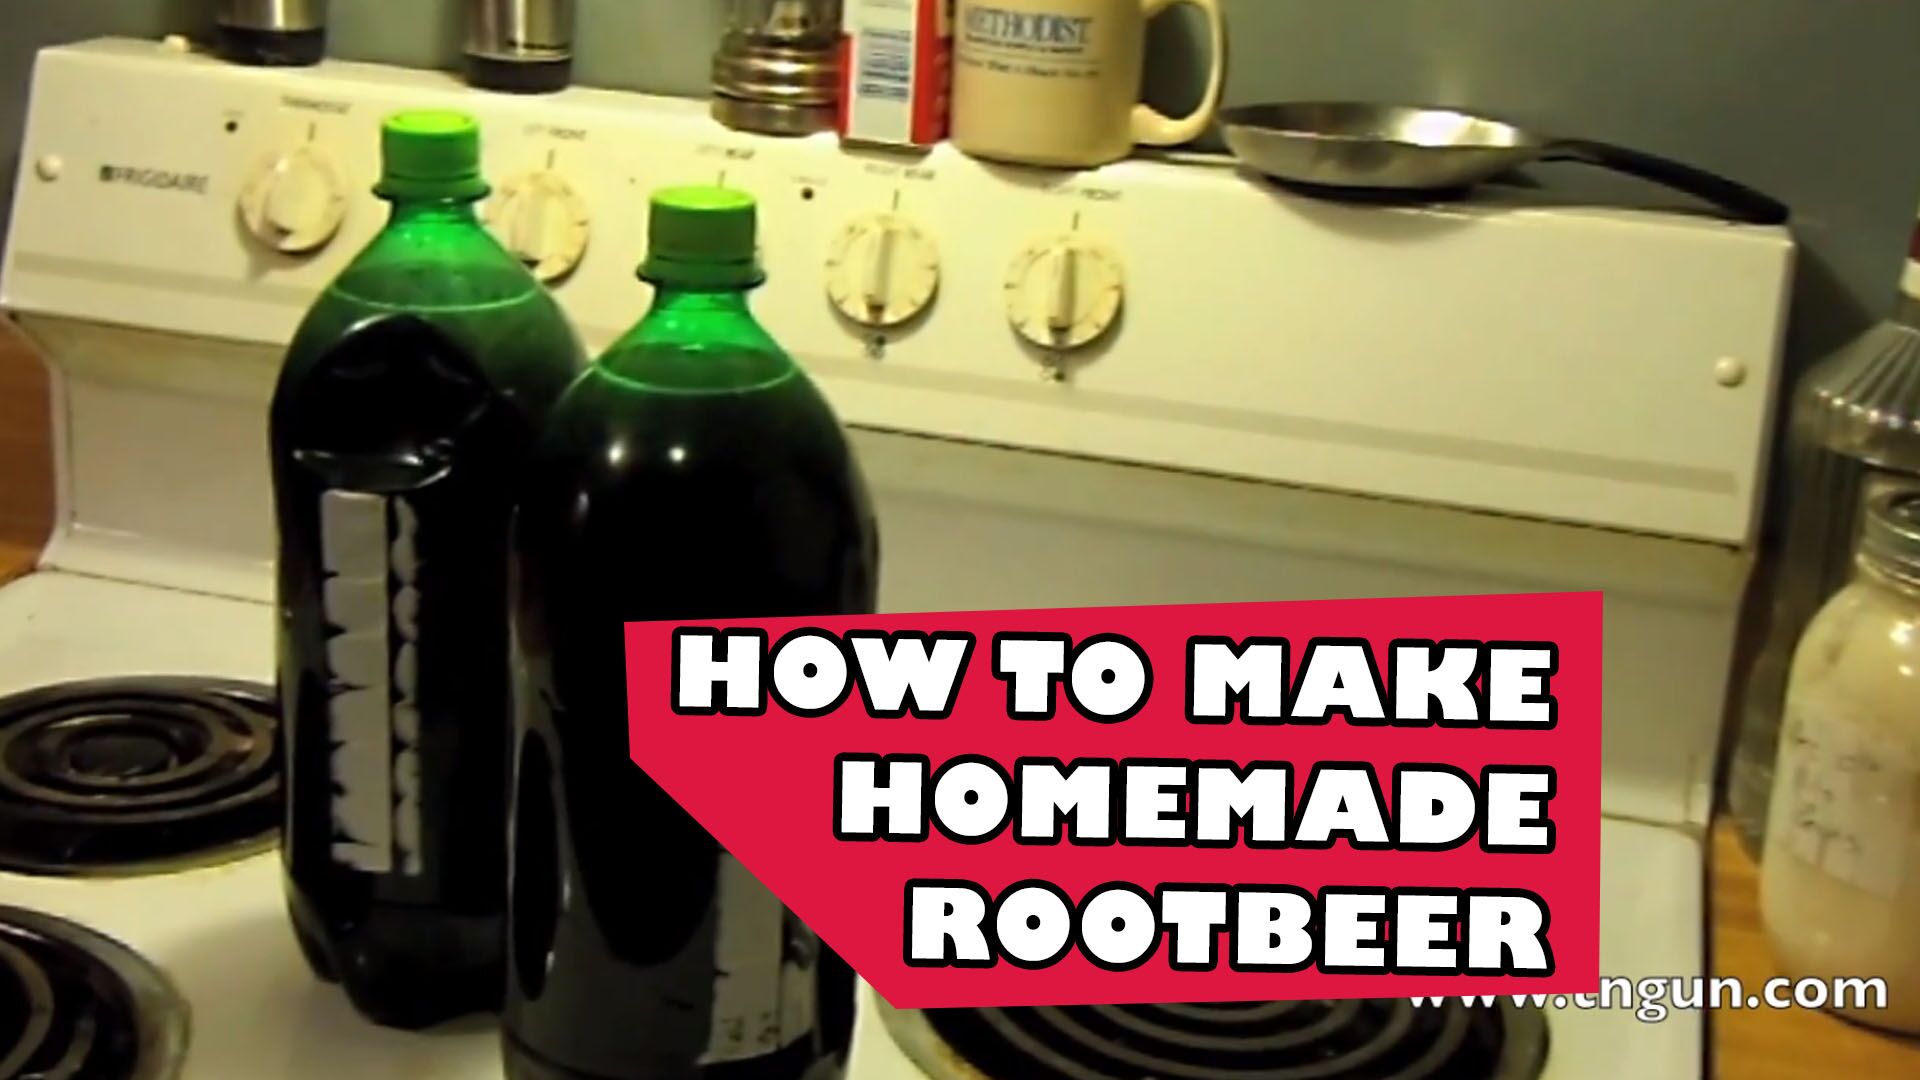 How to Make Homemade Rootbeer